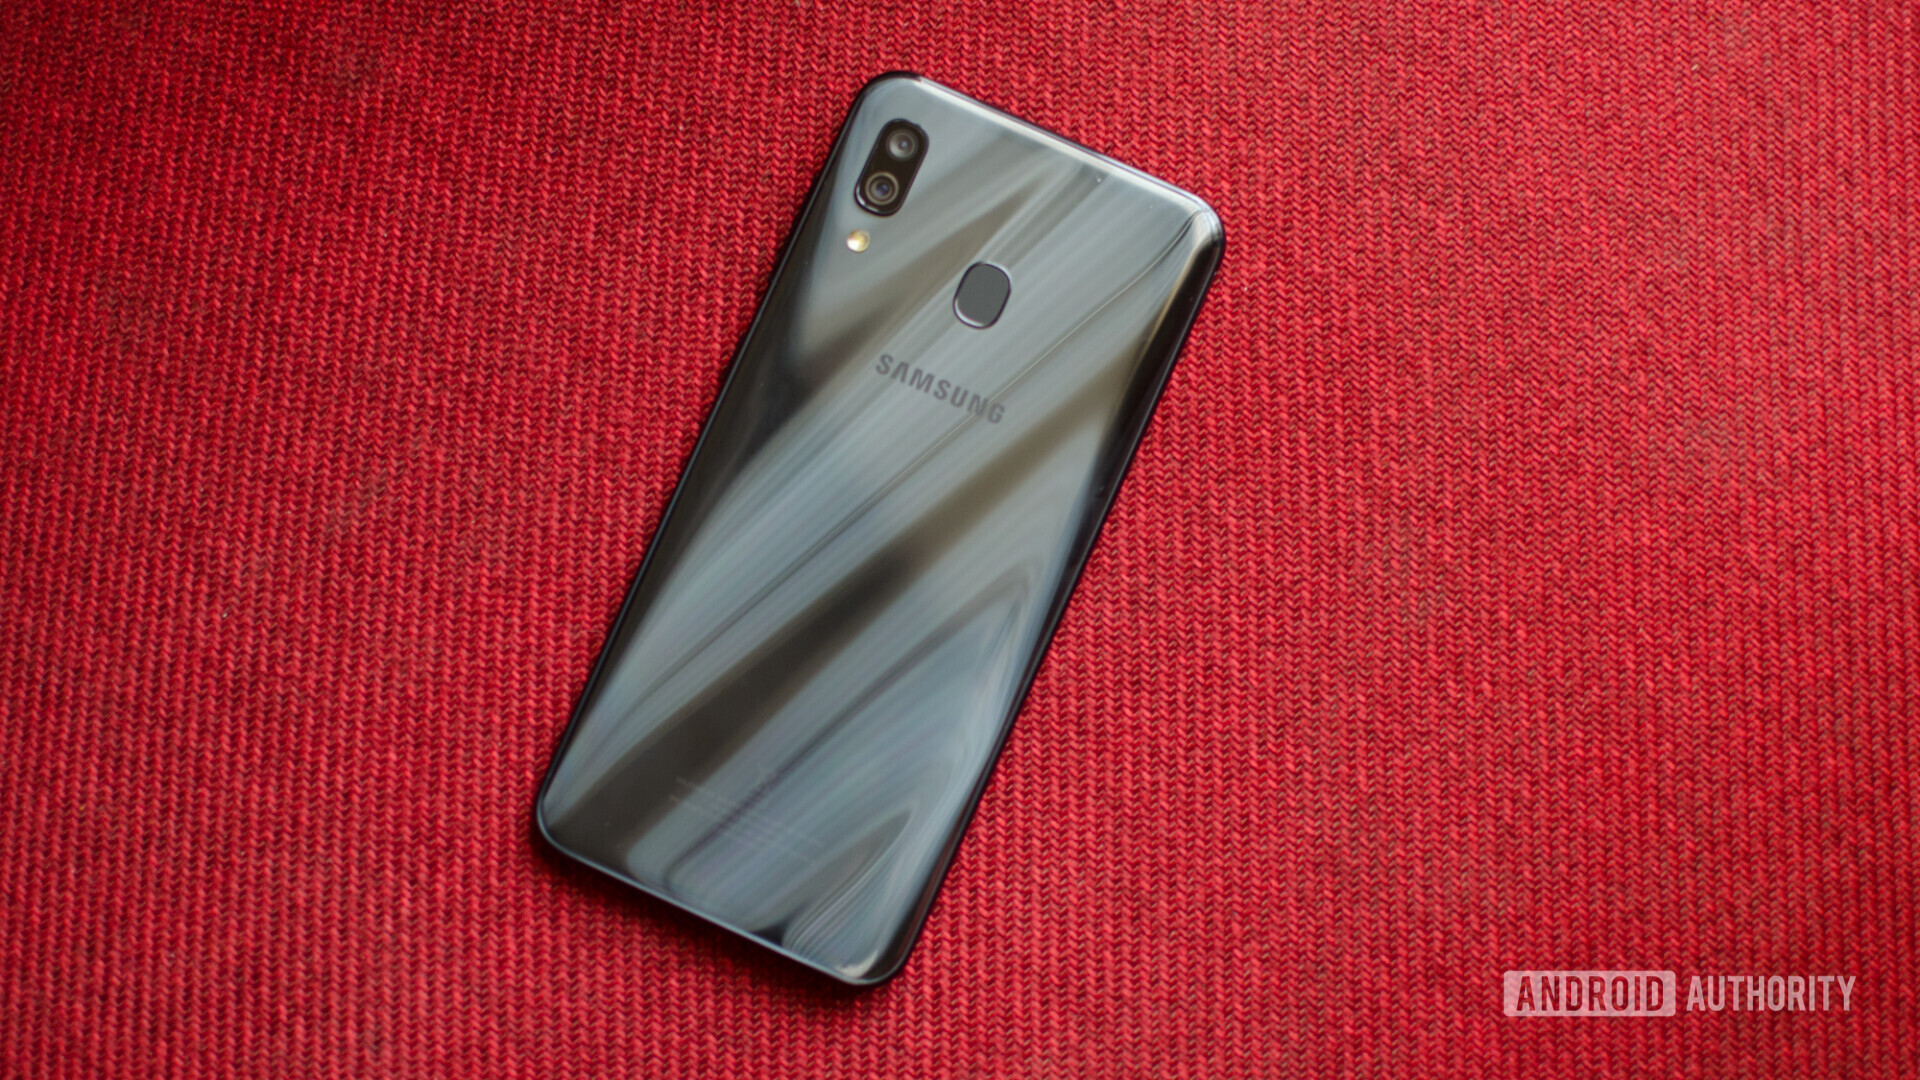 Samsung Galaxy A30 showing gradient finish on the back